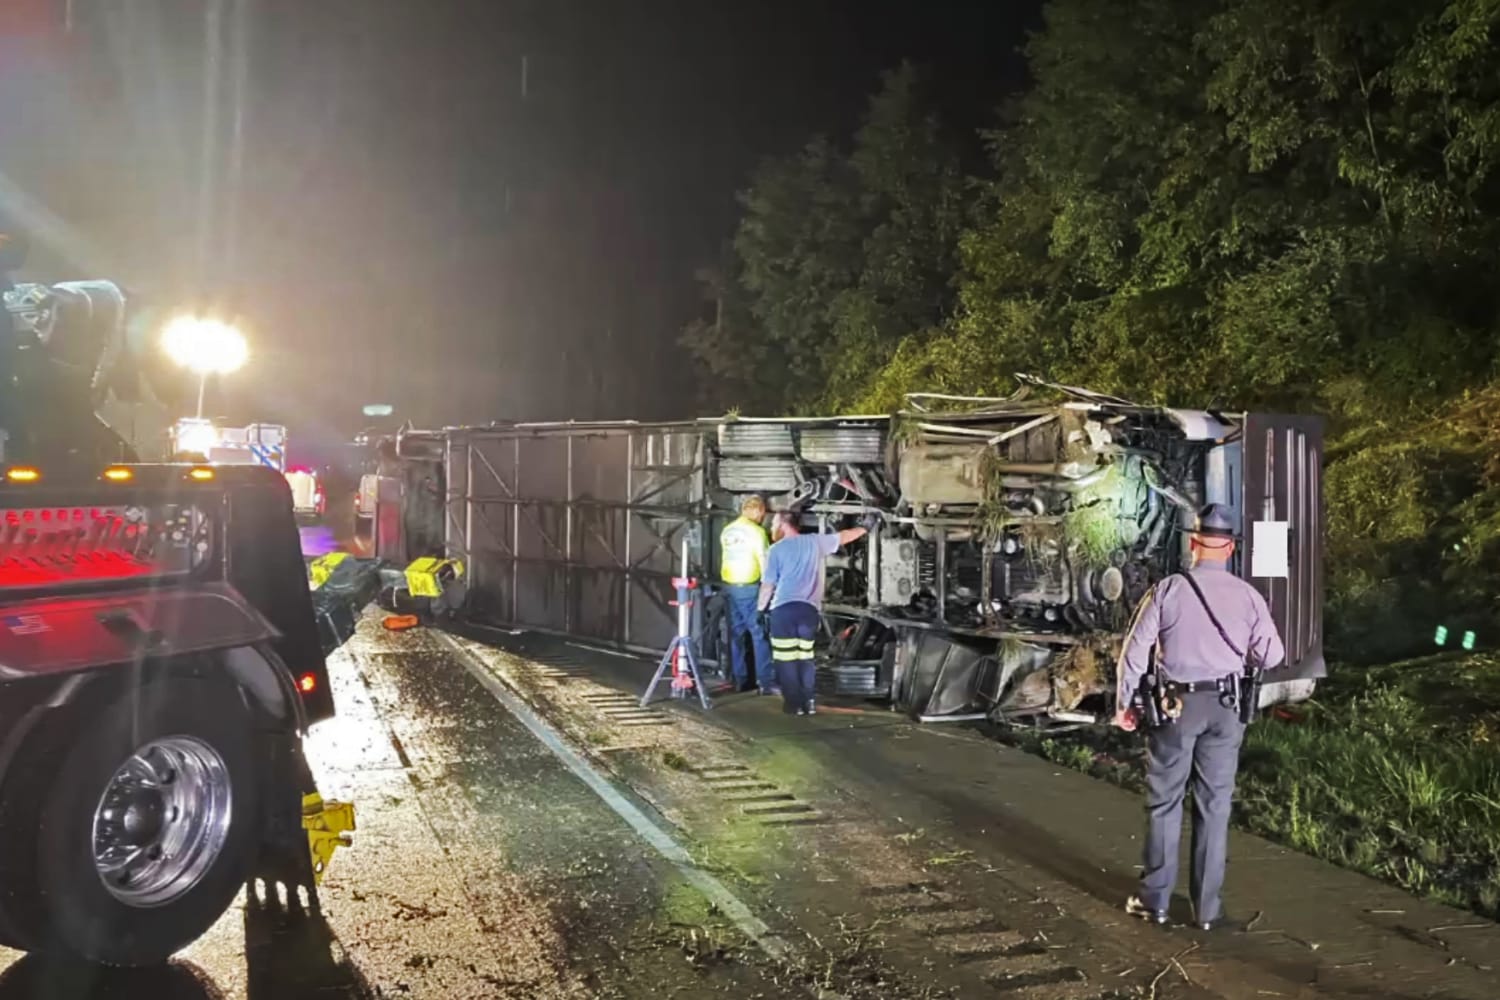 At least 3 dead after bus carrying dozens and vehicle collide on Pennsylvania interstate